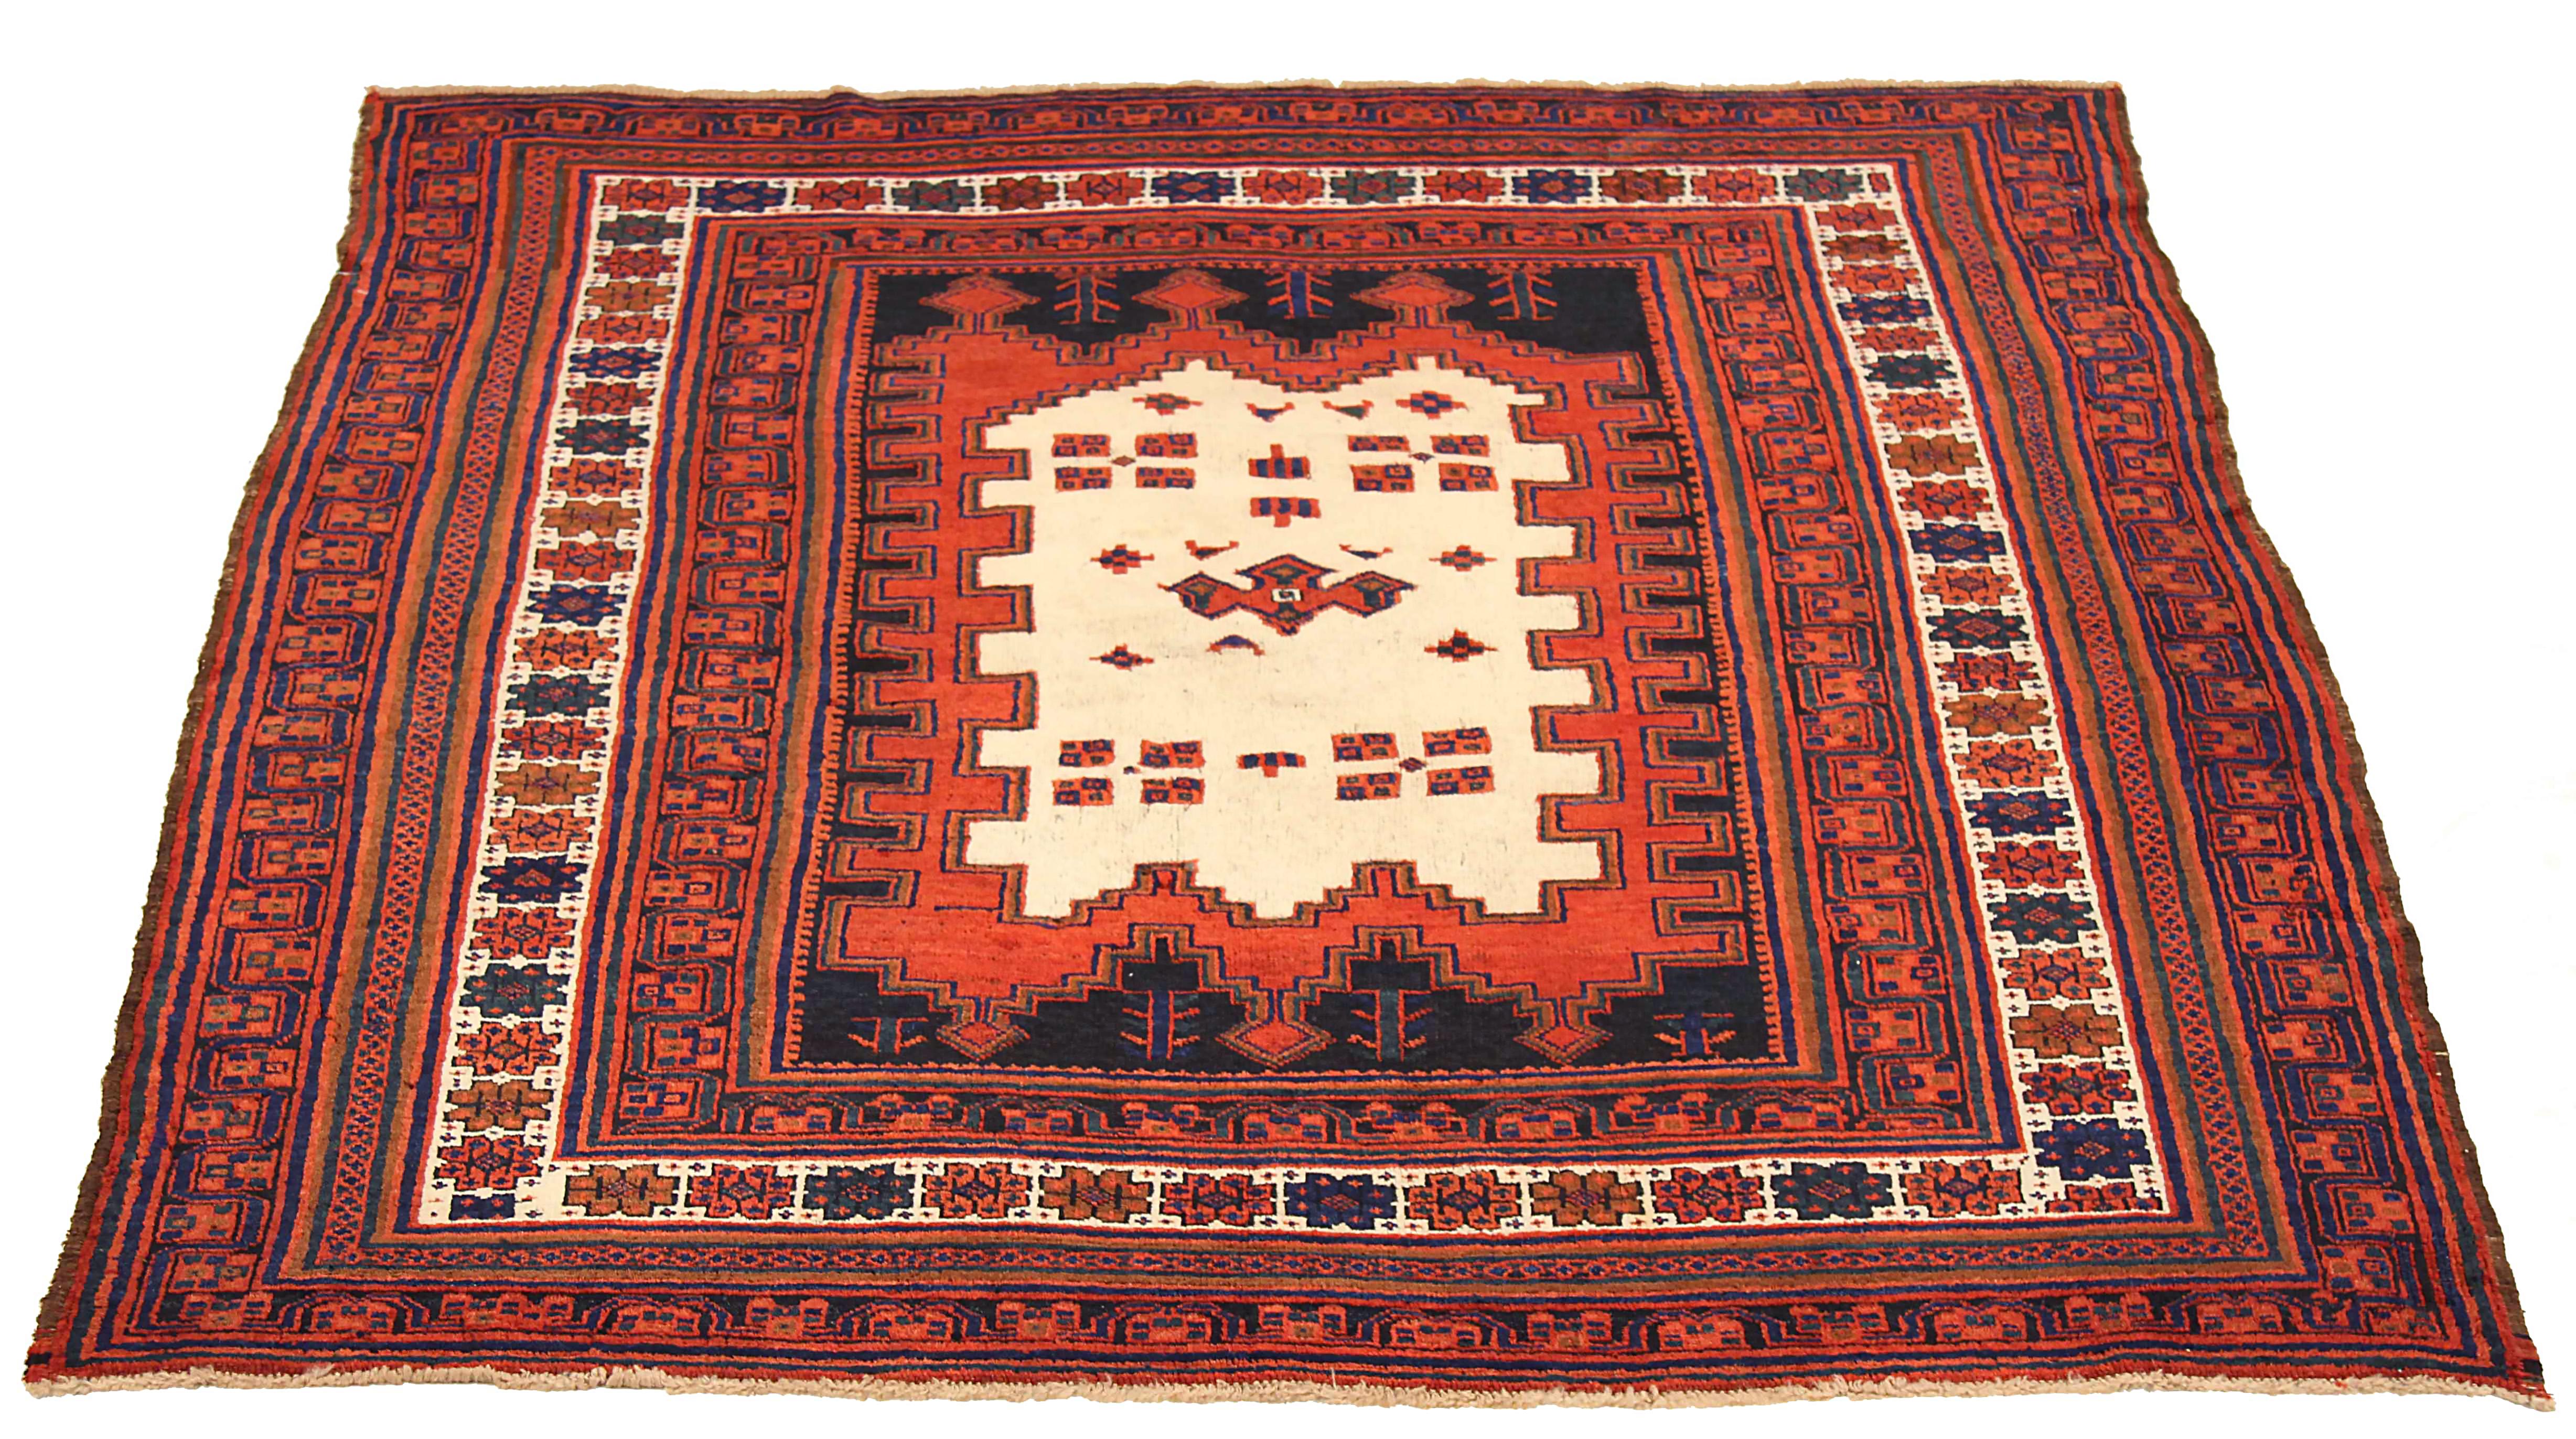 Antique Persian square rug handwoven from the finest sheep’s wool. It’s colored with all-natural vegetable dyes that are safe for humans and pets. It’s a traditional Sirjan design handwoven by expert artisans. It’s a lovely square rug that can be